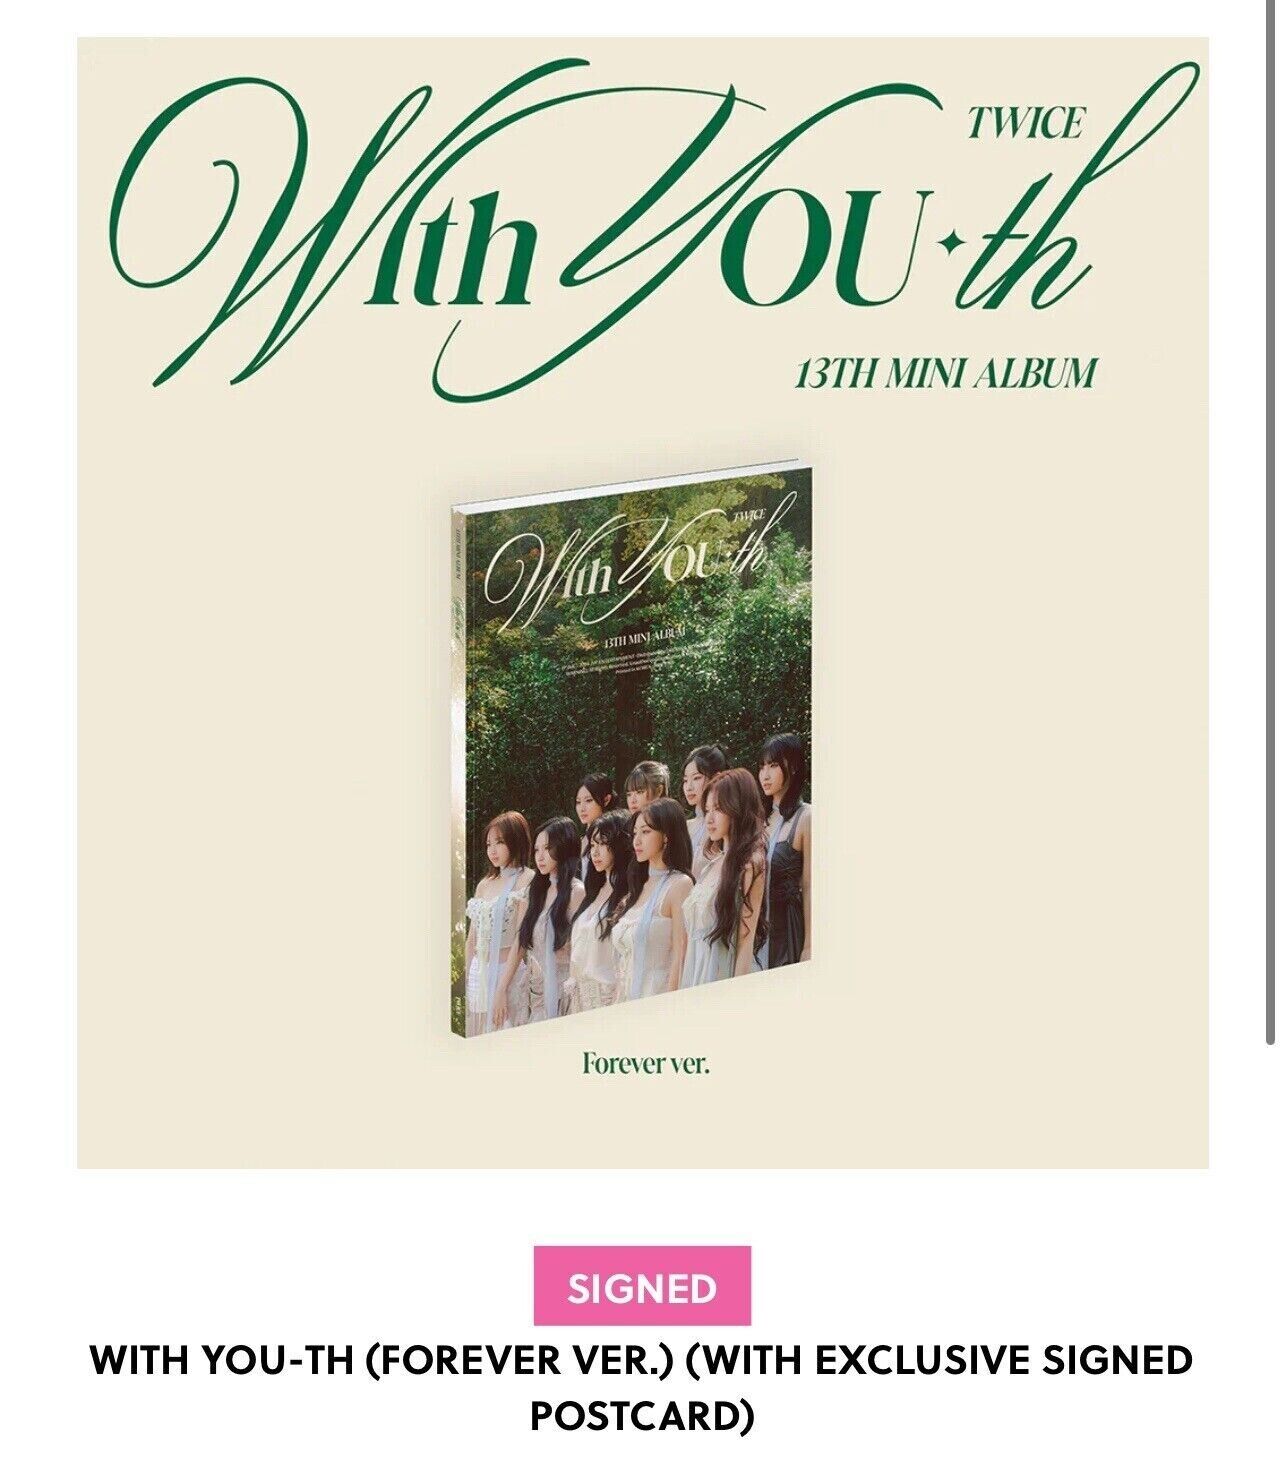 TWICE-13TH MINI ALBUM WITH YOU-TH SIGNED FOREVER VERSION NEW SEALED